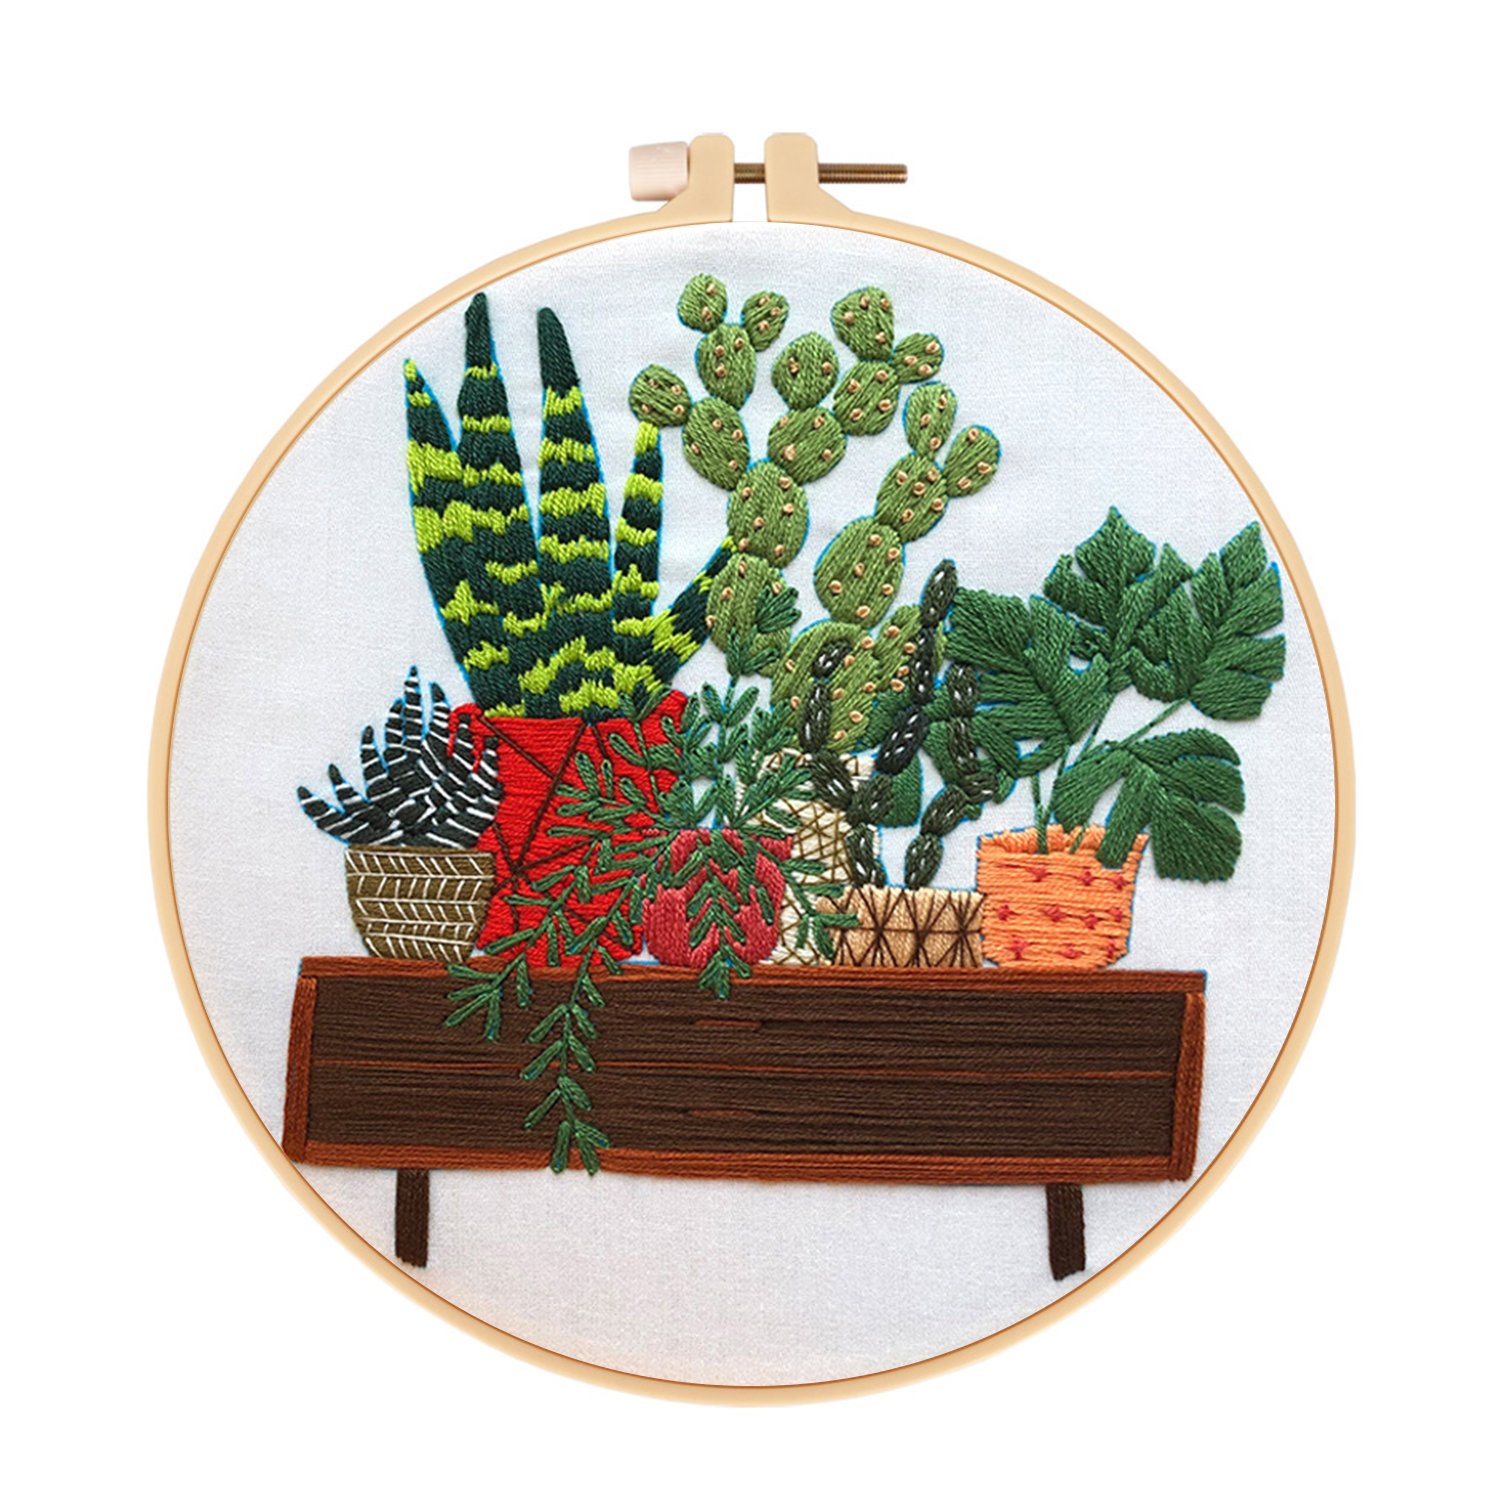 DIY Handmade Embroidery Cross stitch kit - Succulent Potted Plants